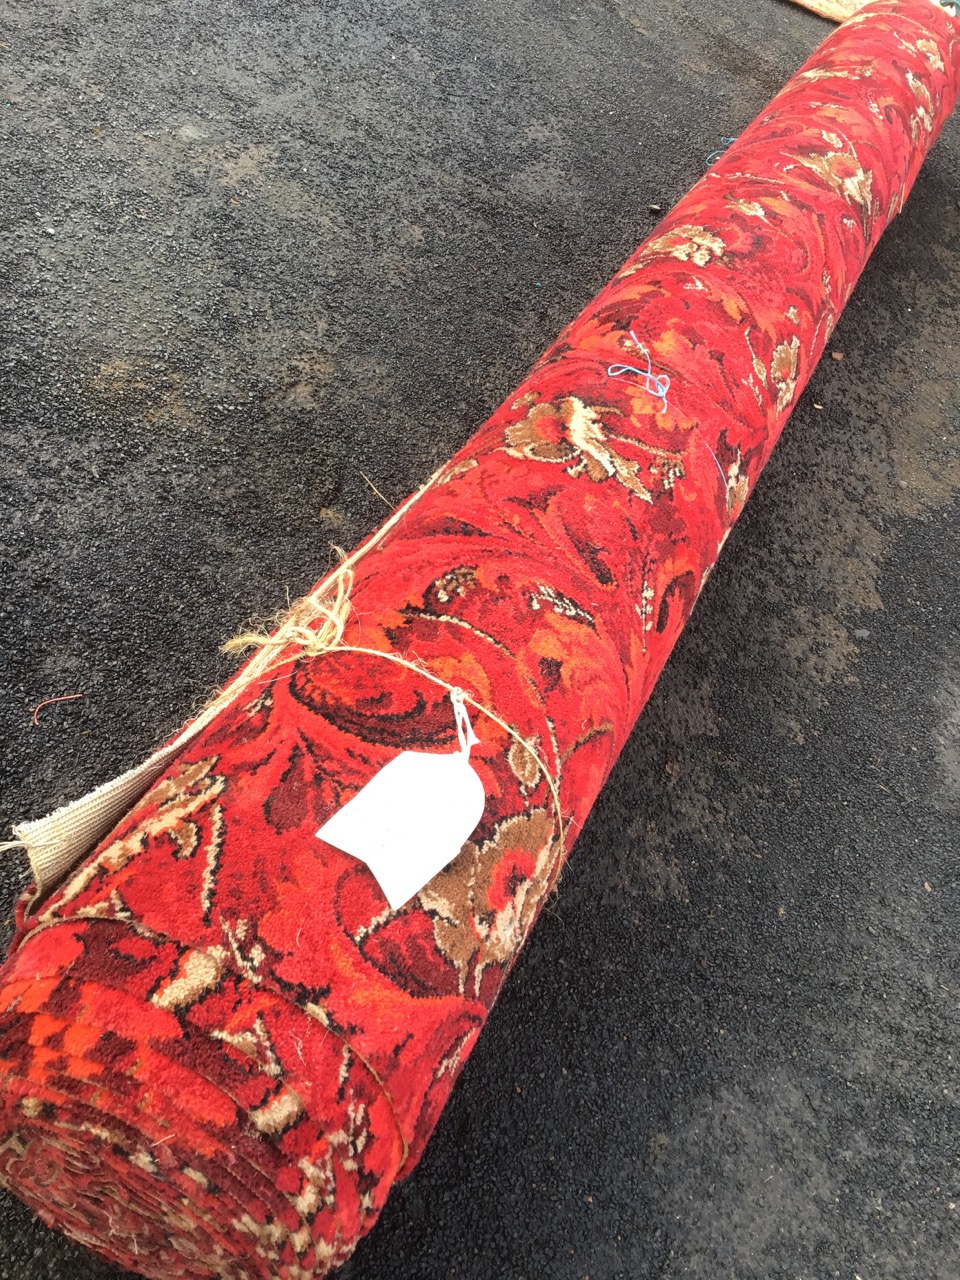 A roll of Axminster carpet of red floral scrolled design that has been in store for 20yrs, never